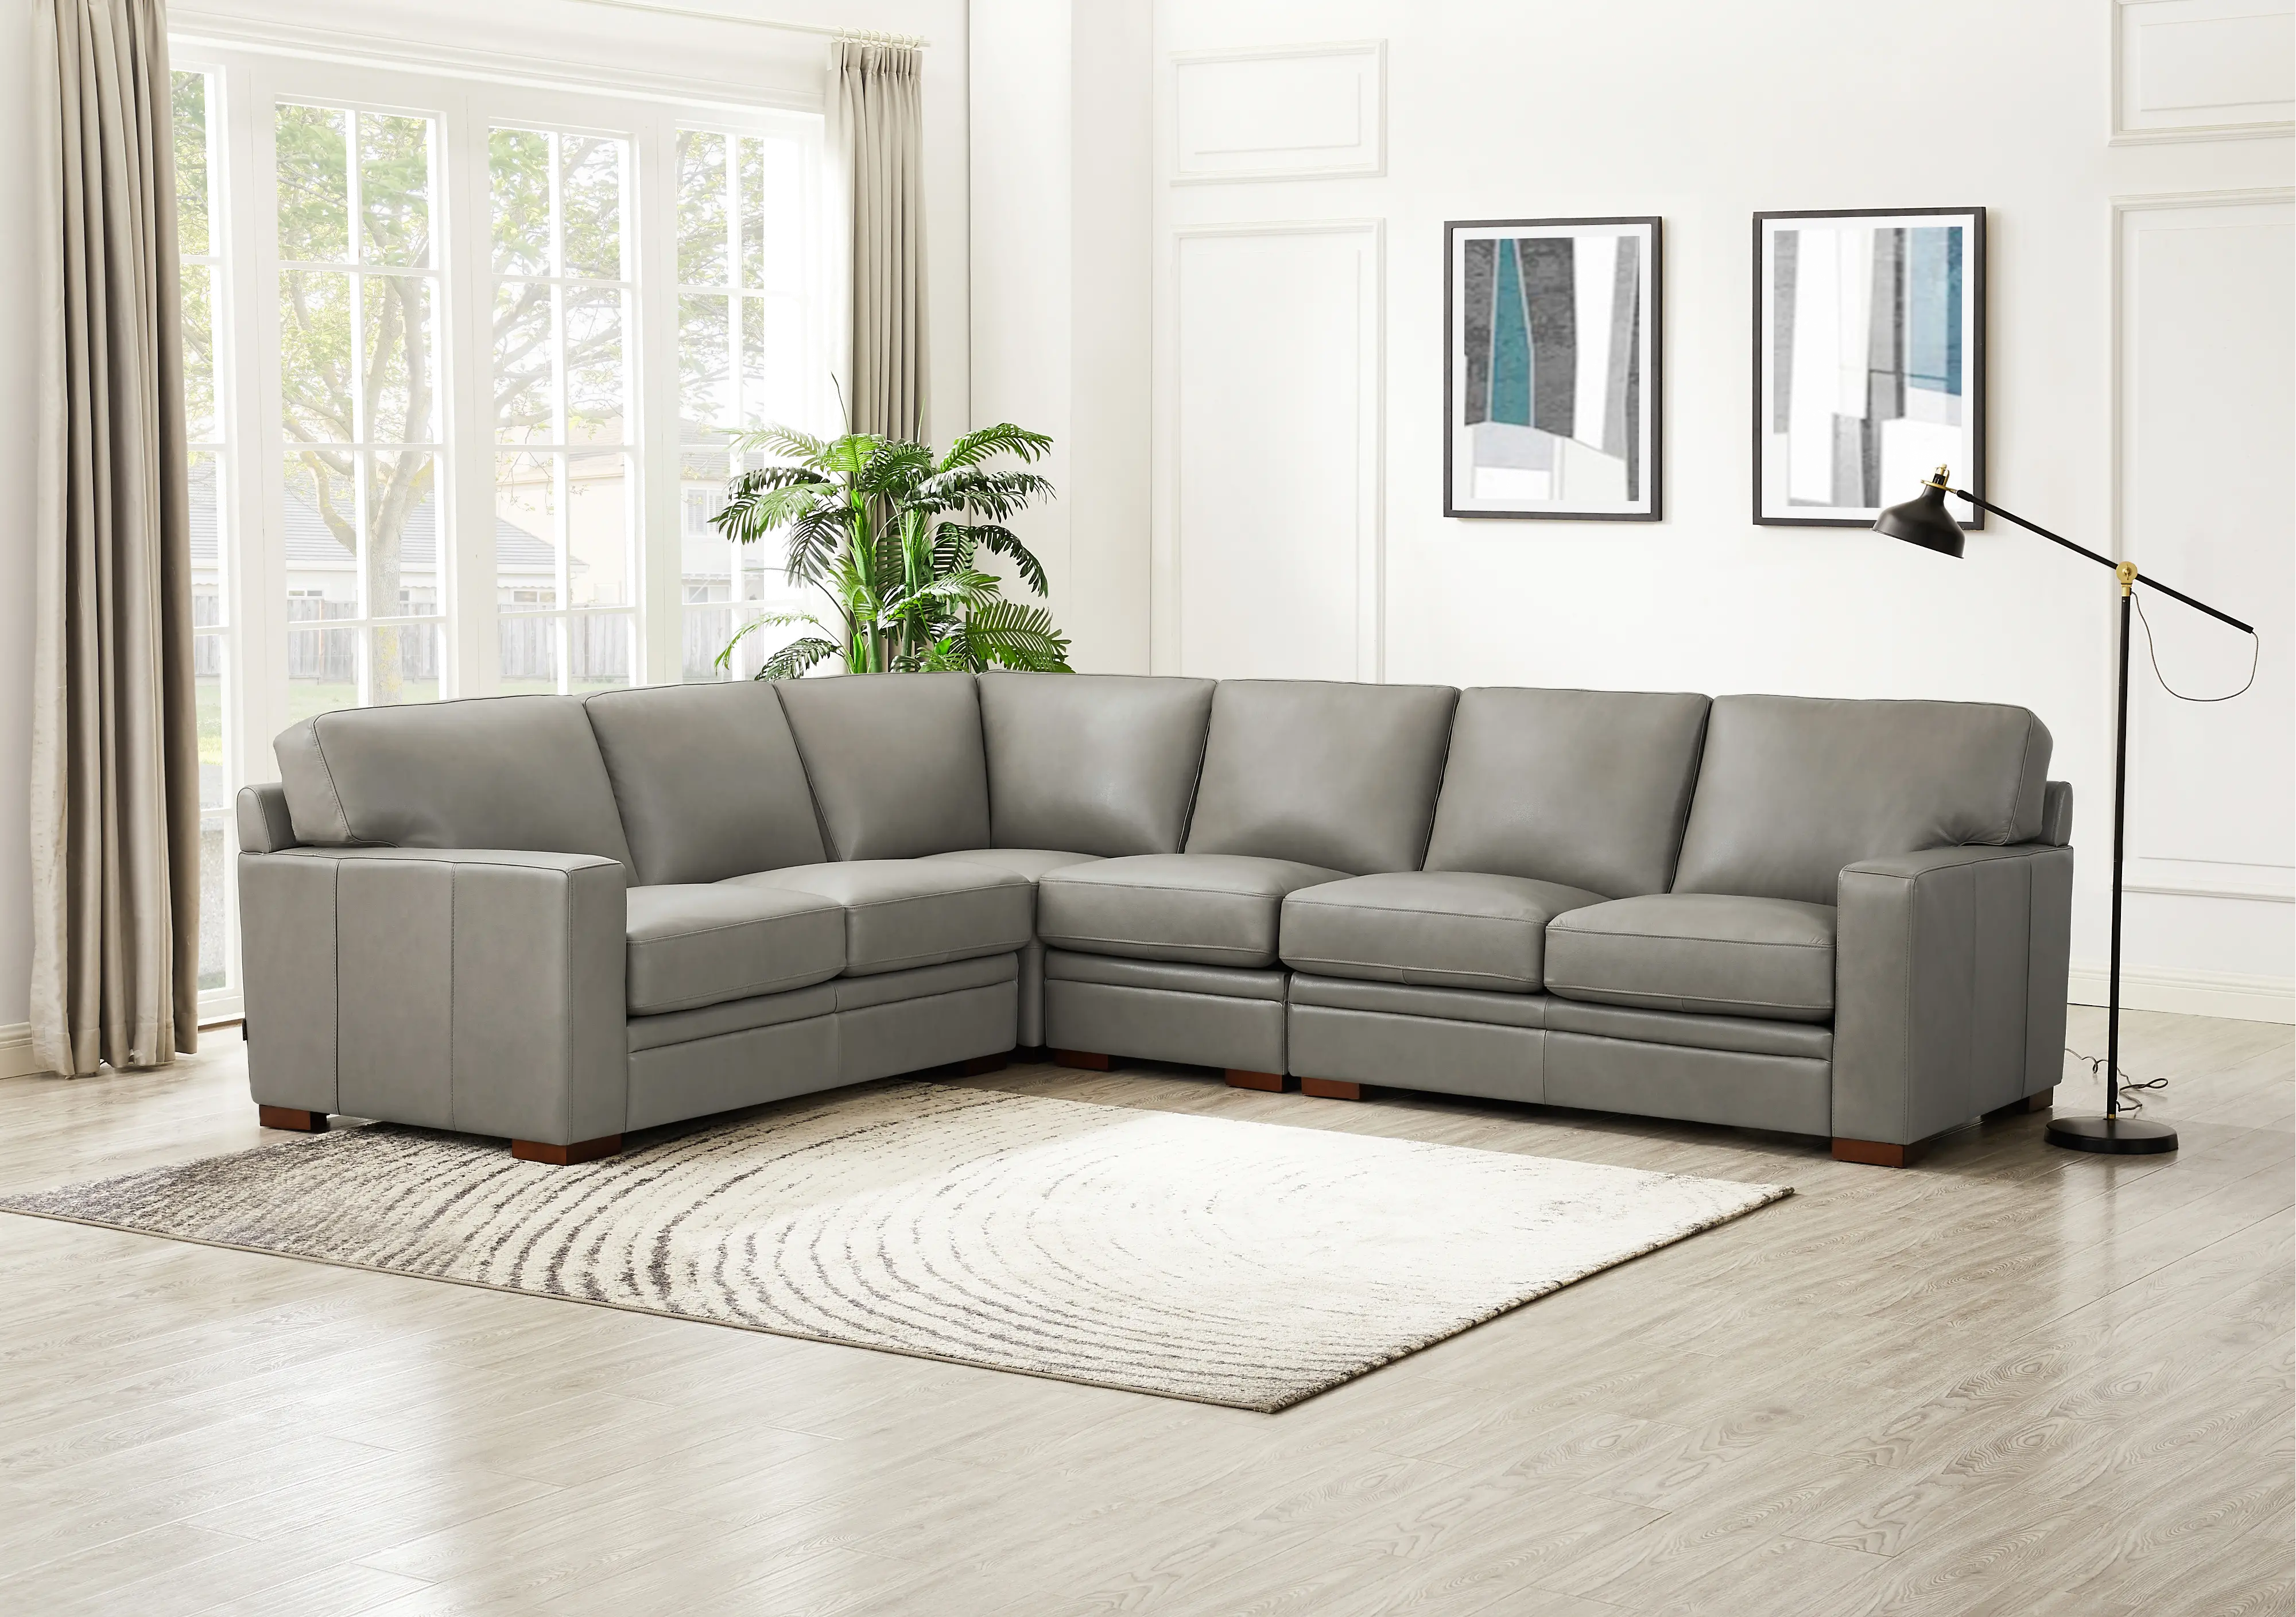 Chatsworth Gray Leather 4 Piece Sectional - Amax Leather